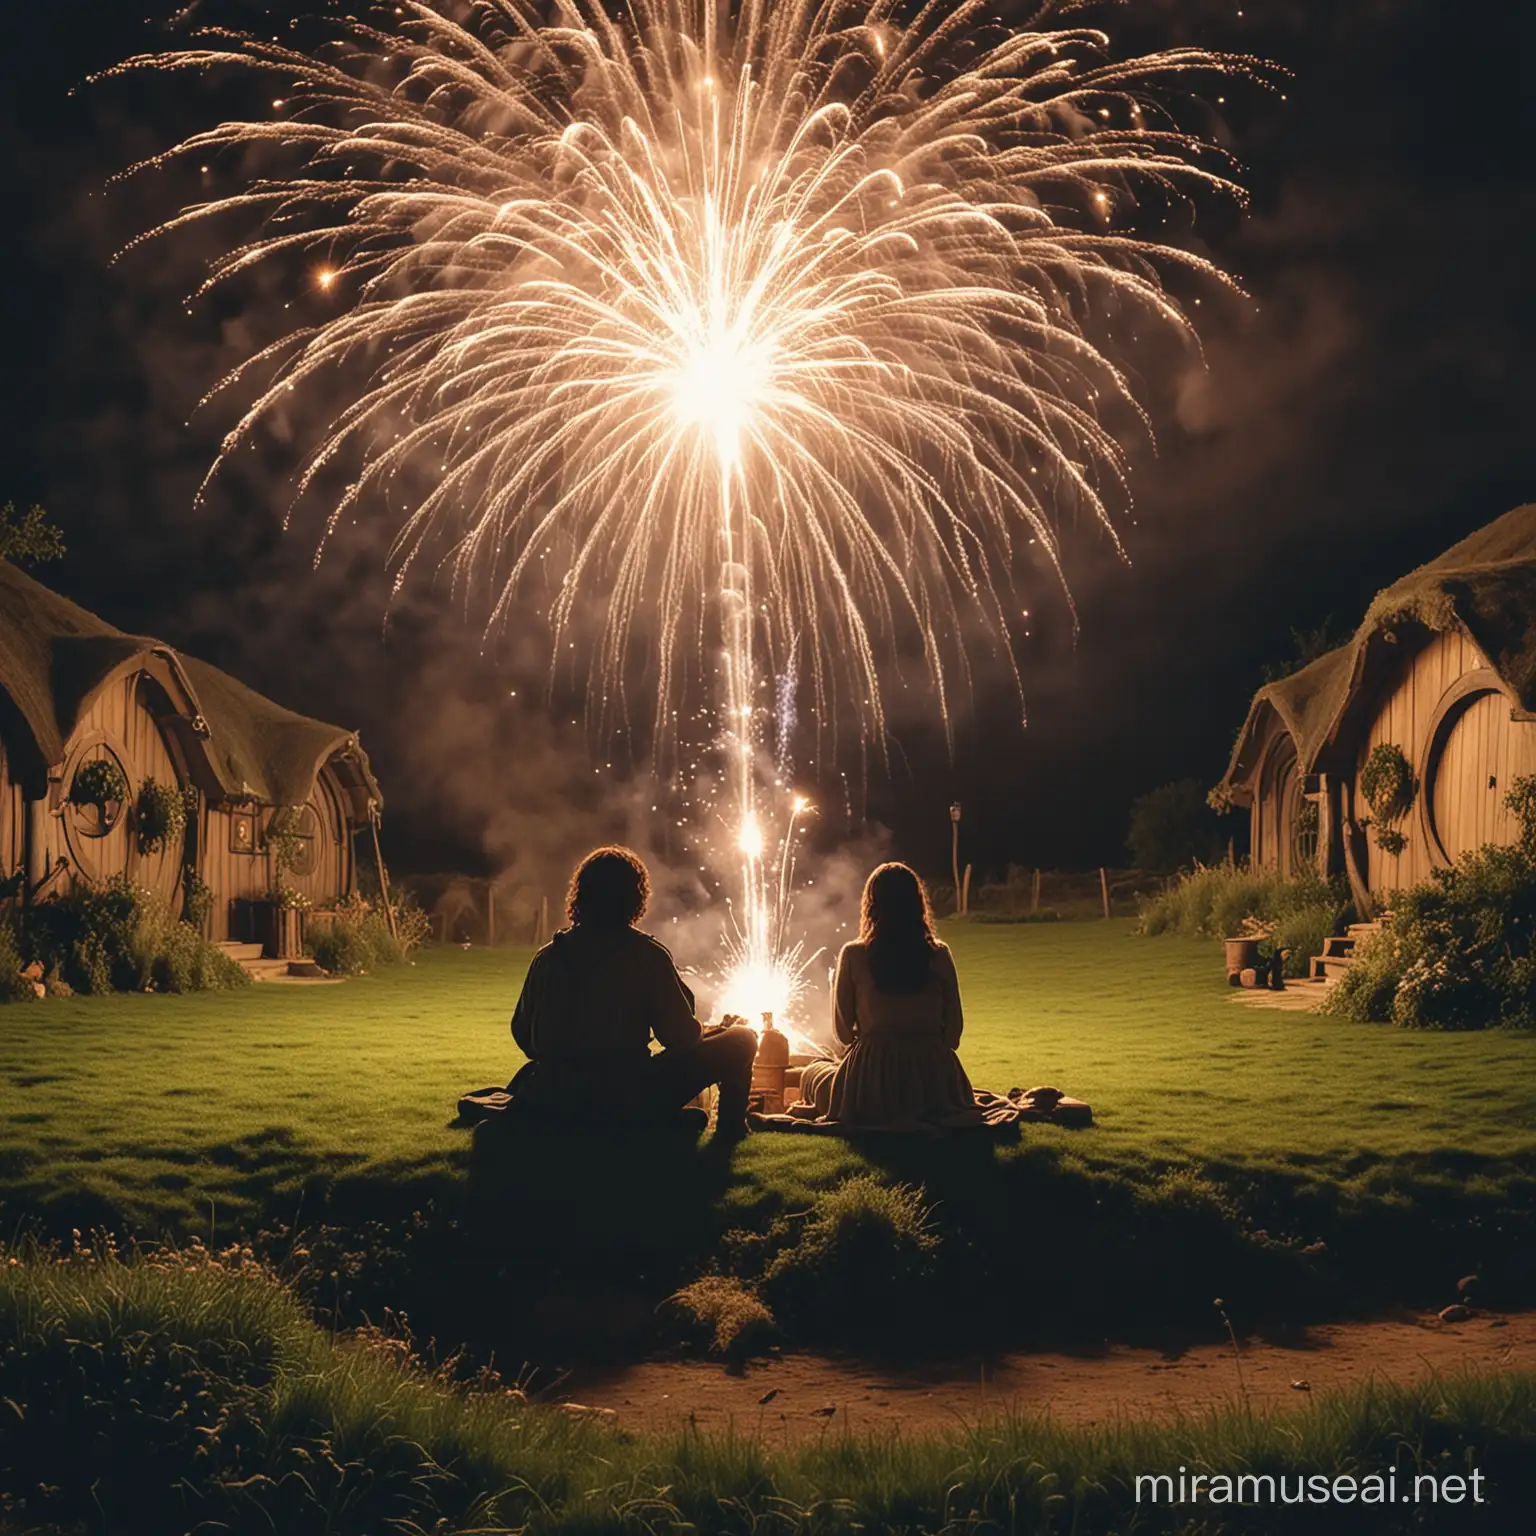 two people sitting in the shire lord of the rings, male and female, add fireworks